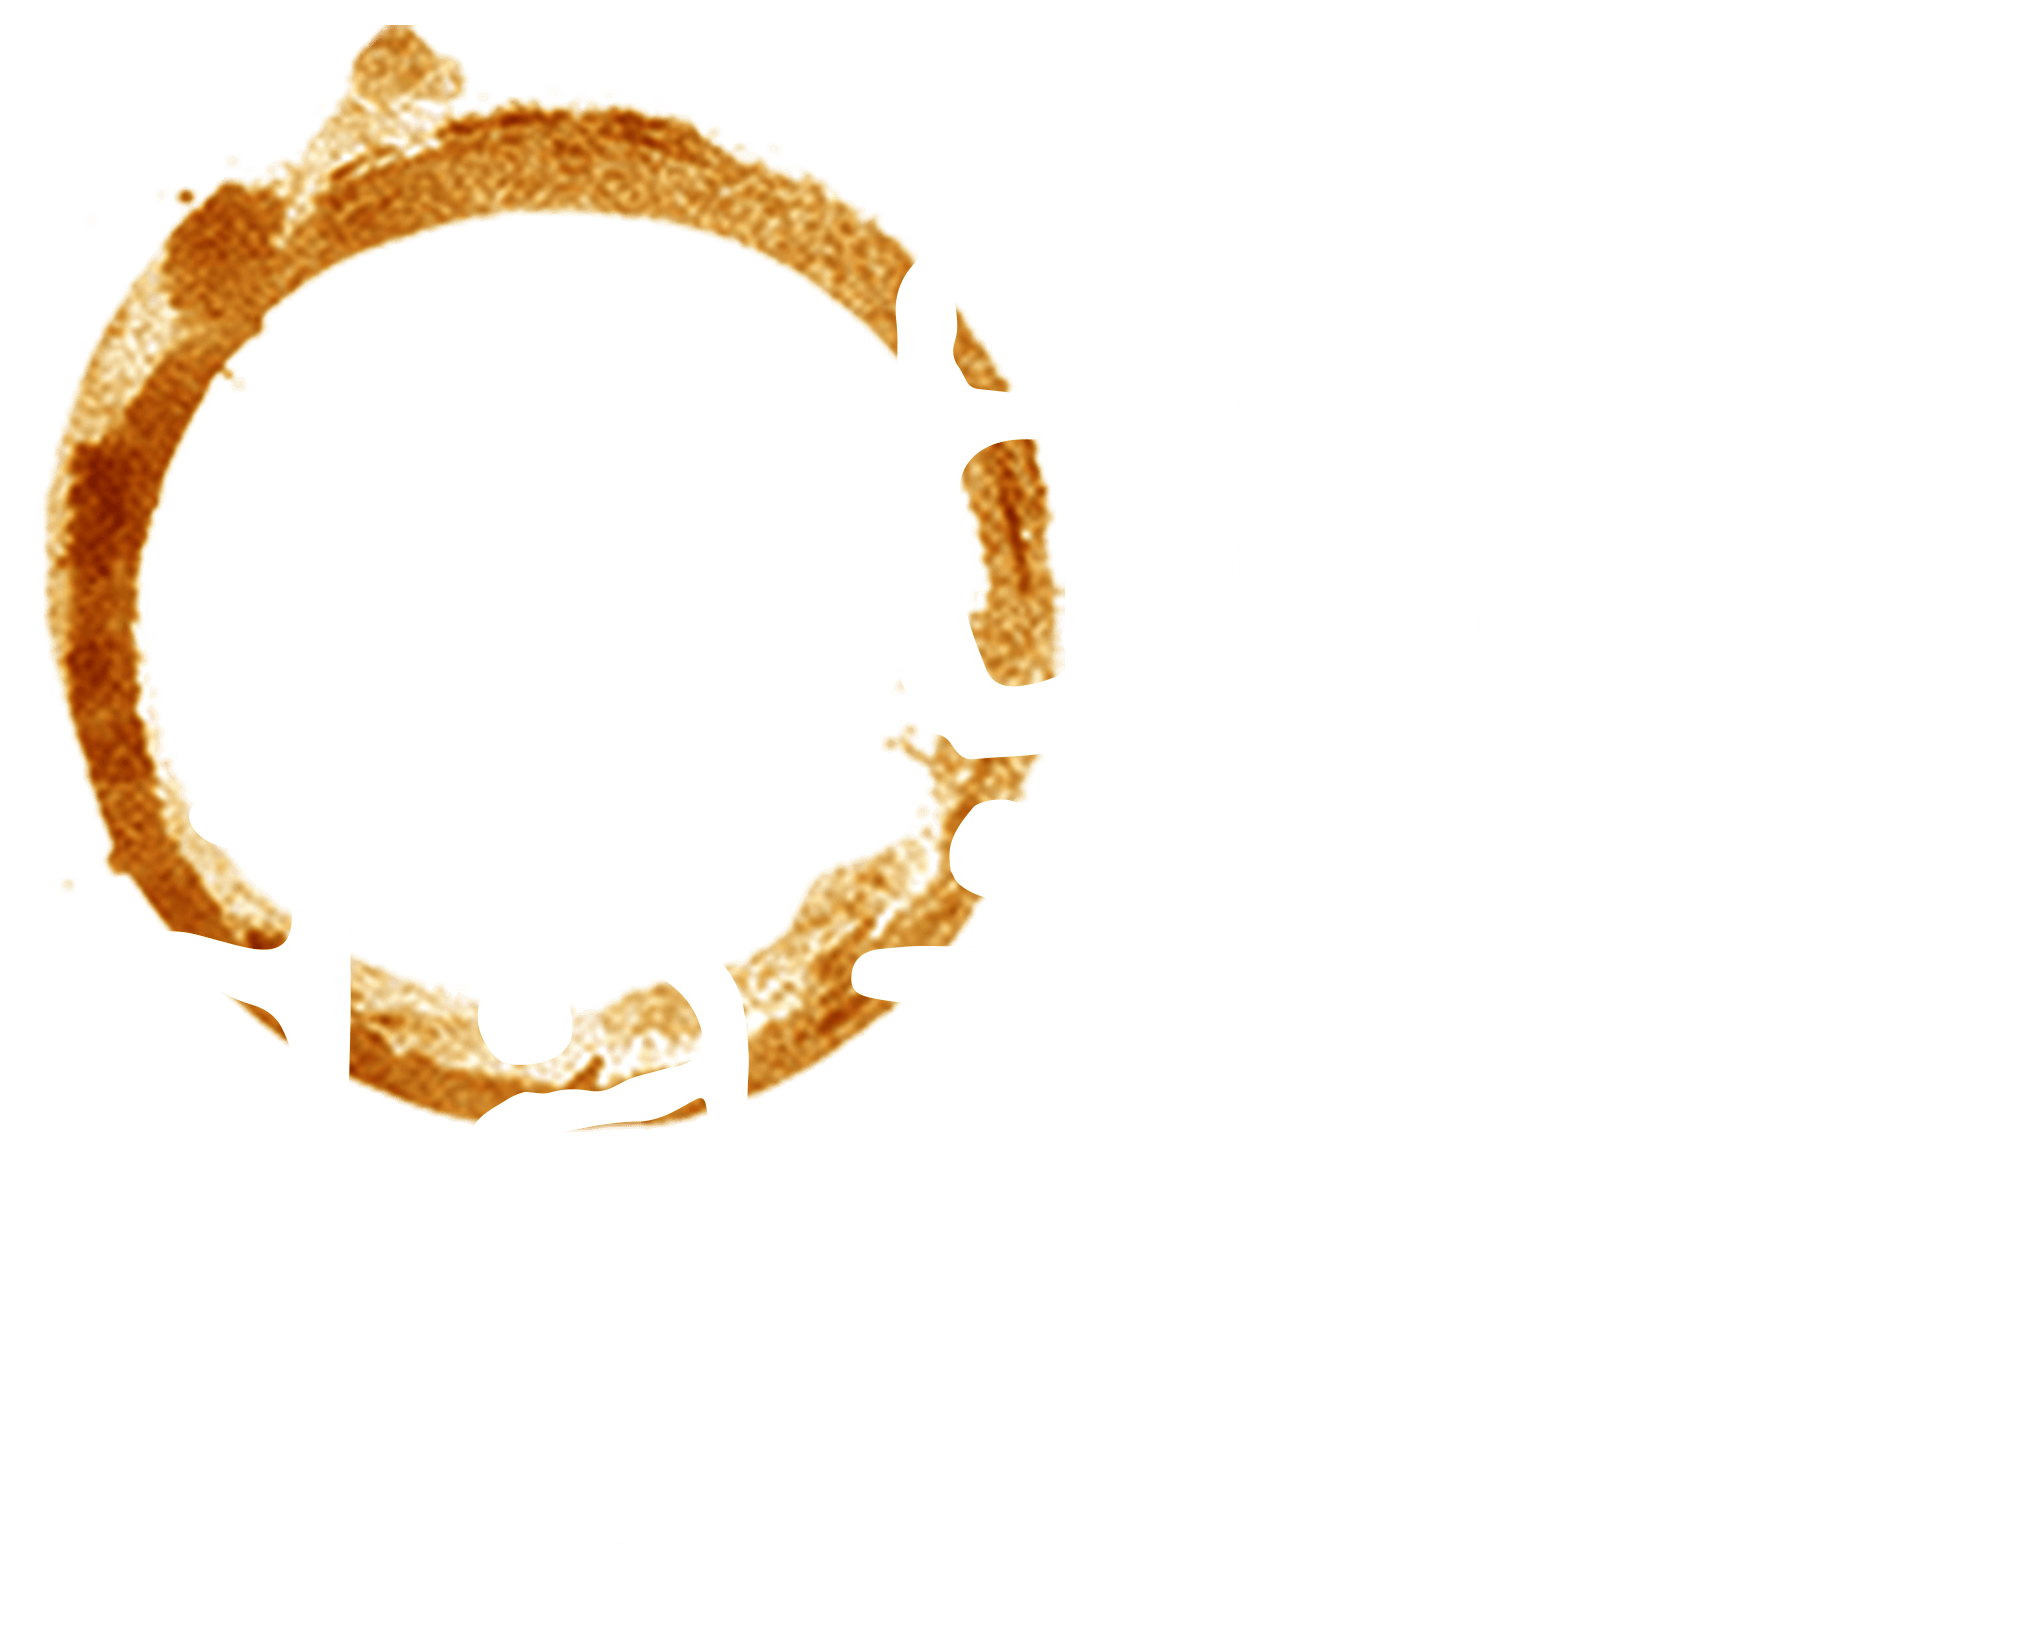 All Cafe Logo - Welcome - The Daily Coffee Cafe